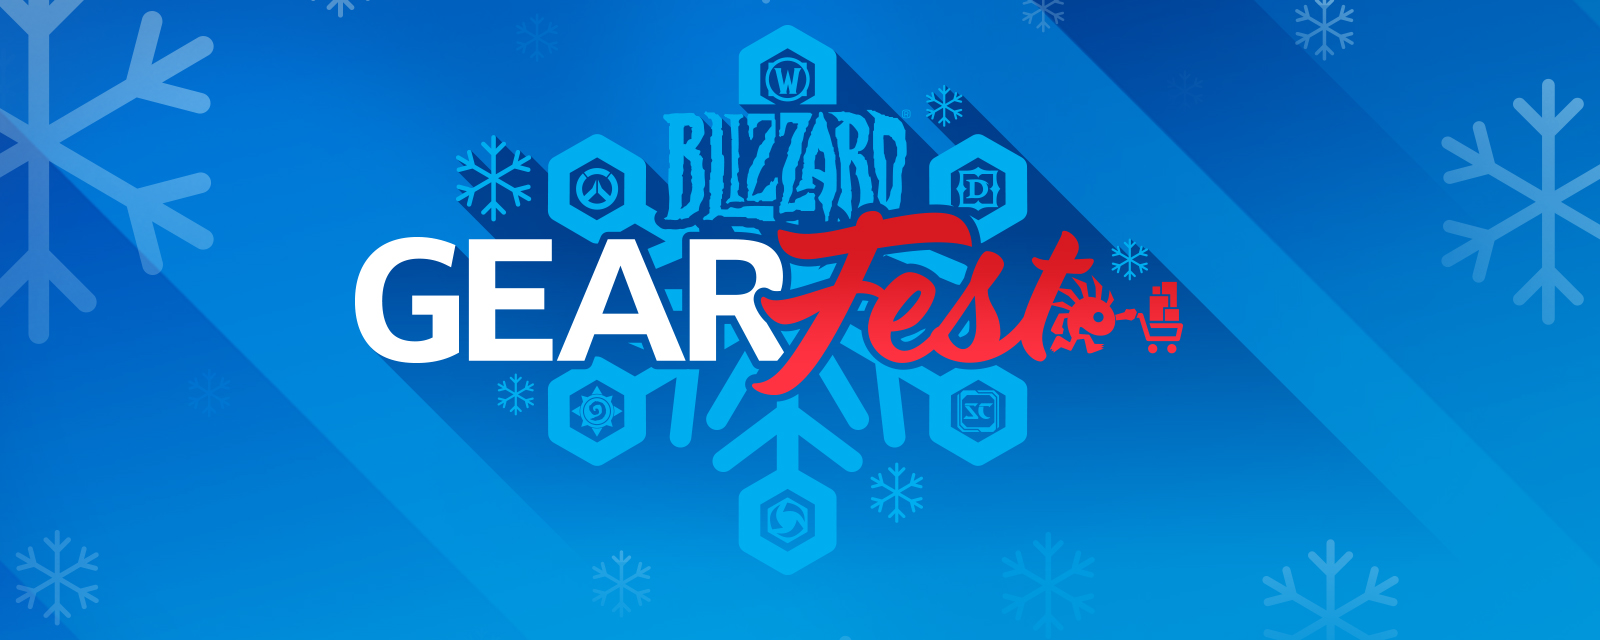 Blizzard GearFest returns: Get weekly drops throughout November and December